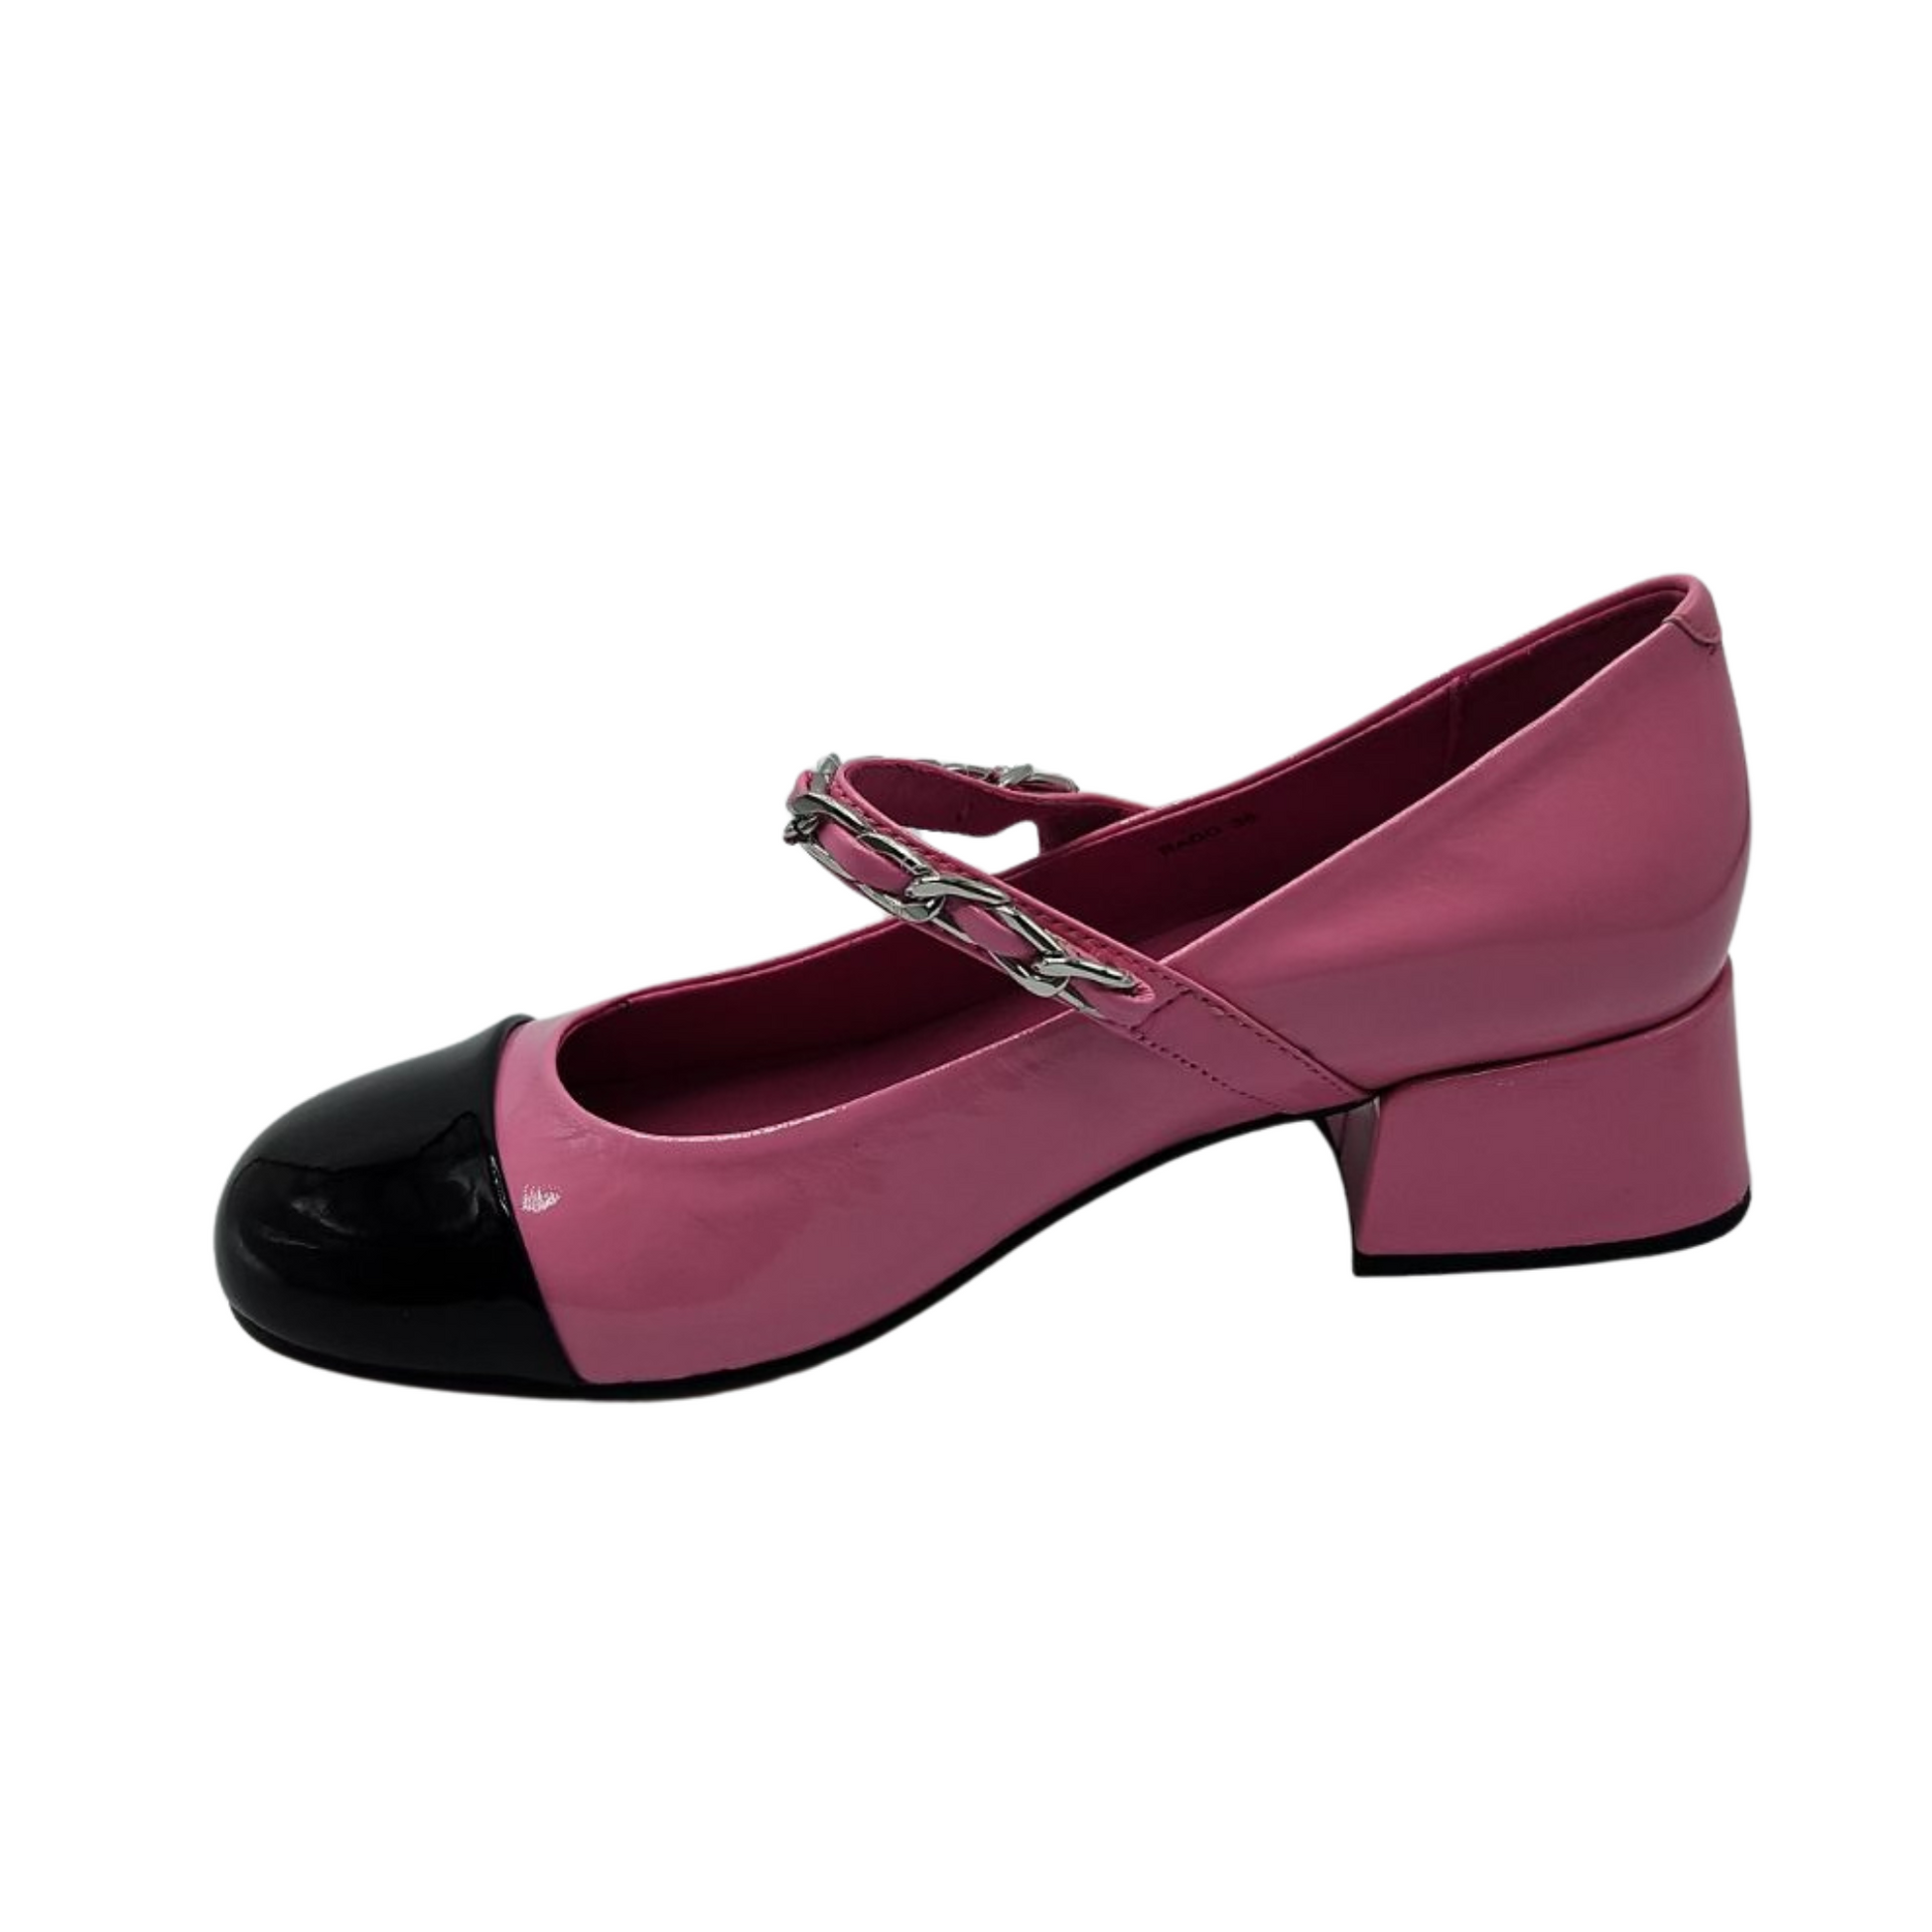 Left facing view of pink and black patent leather mary jane with pearl and chain details on the strap and short block heel